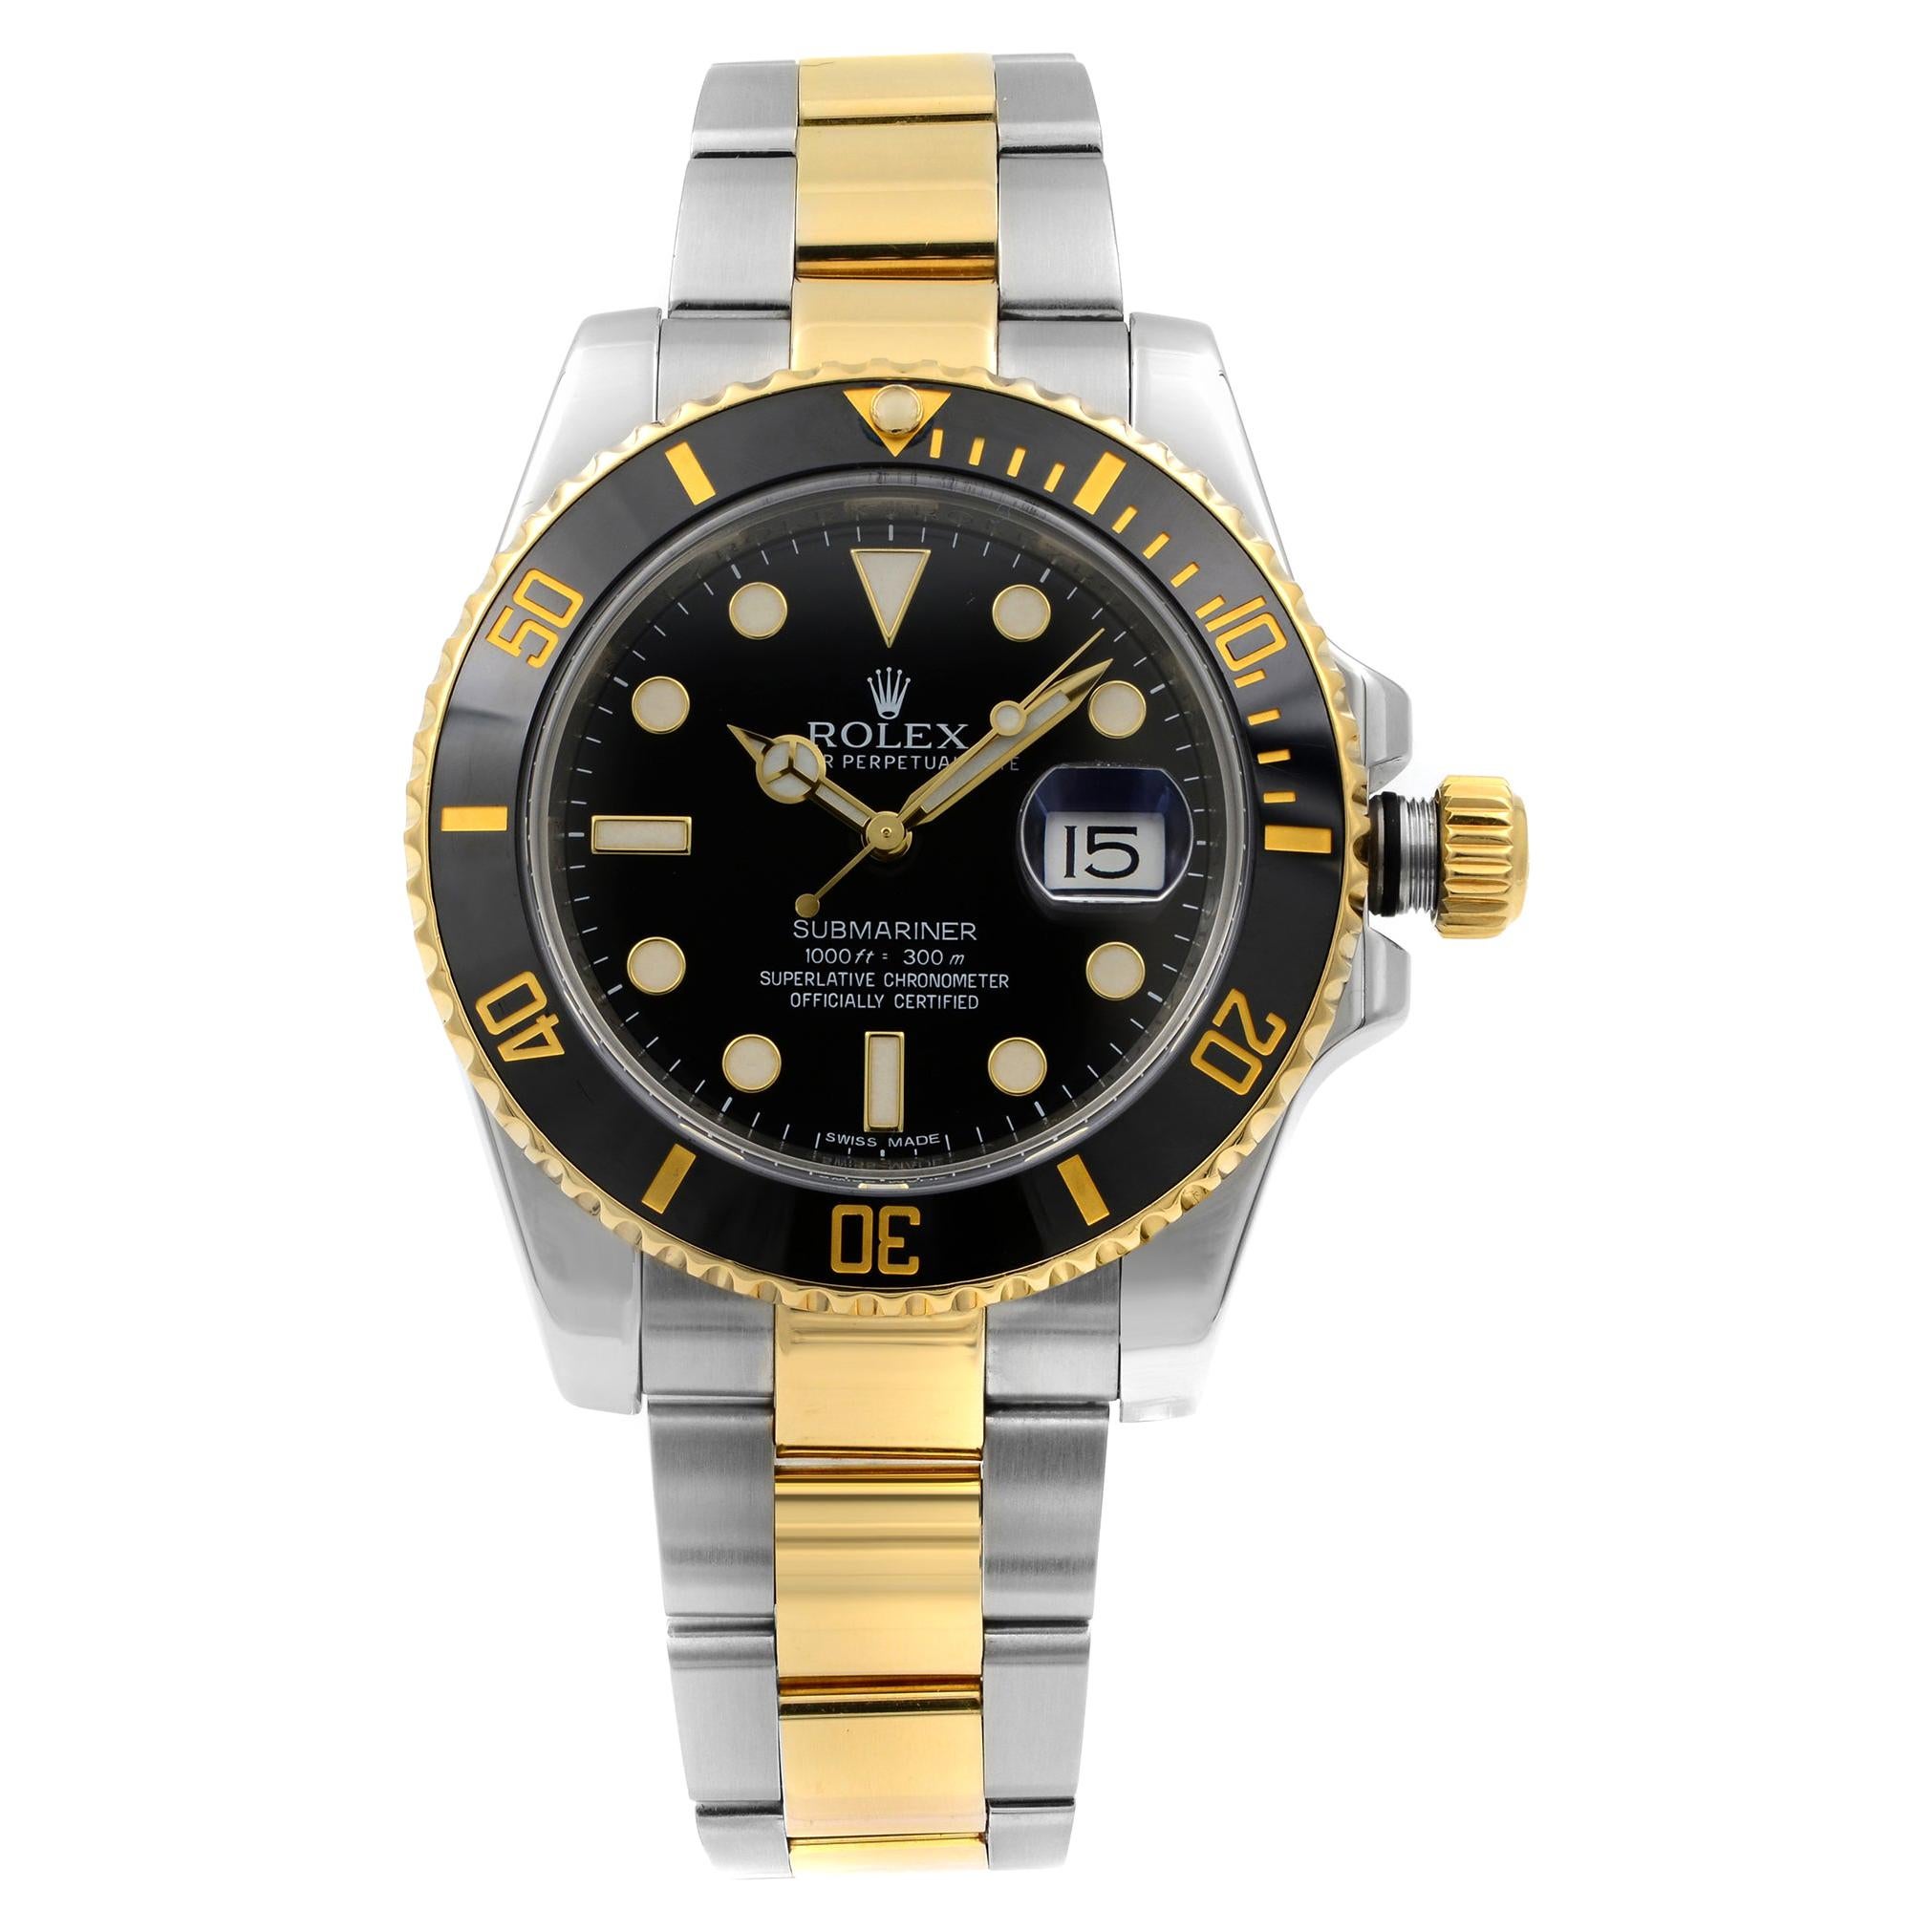 Rolex Submariner 18k Yellow Gold Steel Black Dial Automatic Men Watch 116613